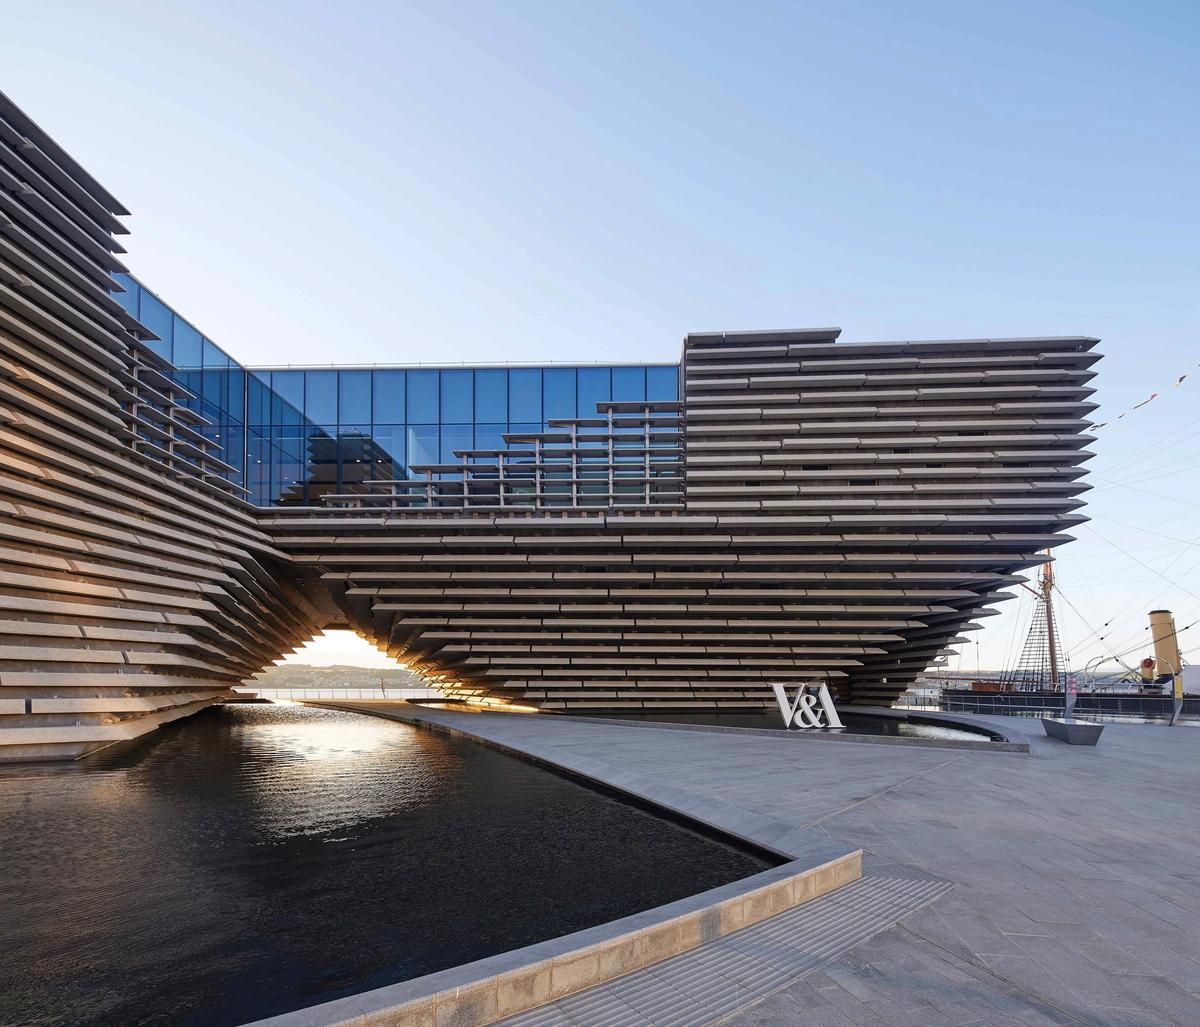 V&A Dundee, Scotland's design museum, was forced to close just 18 months after its inauguration due to Covid-19 restrictions